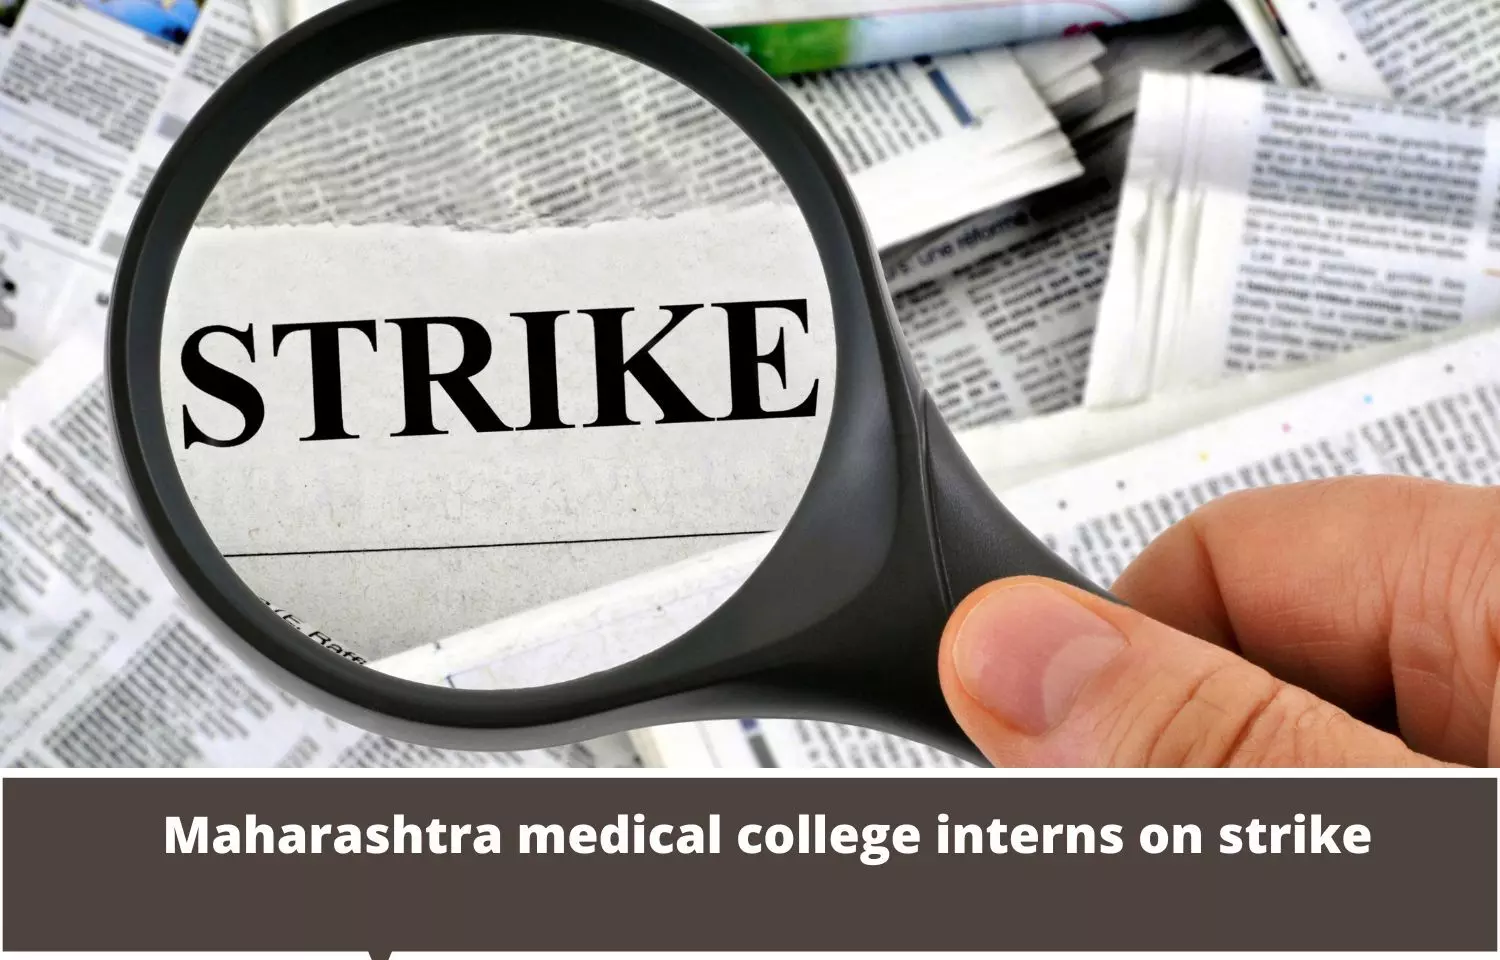 No stipend as per NMC norms: Maharashtra medical college interns on strike